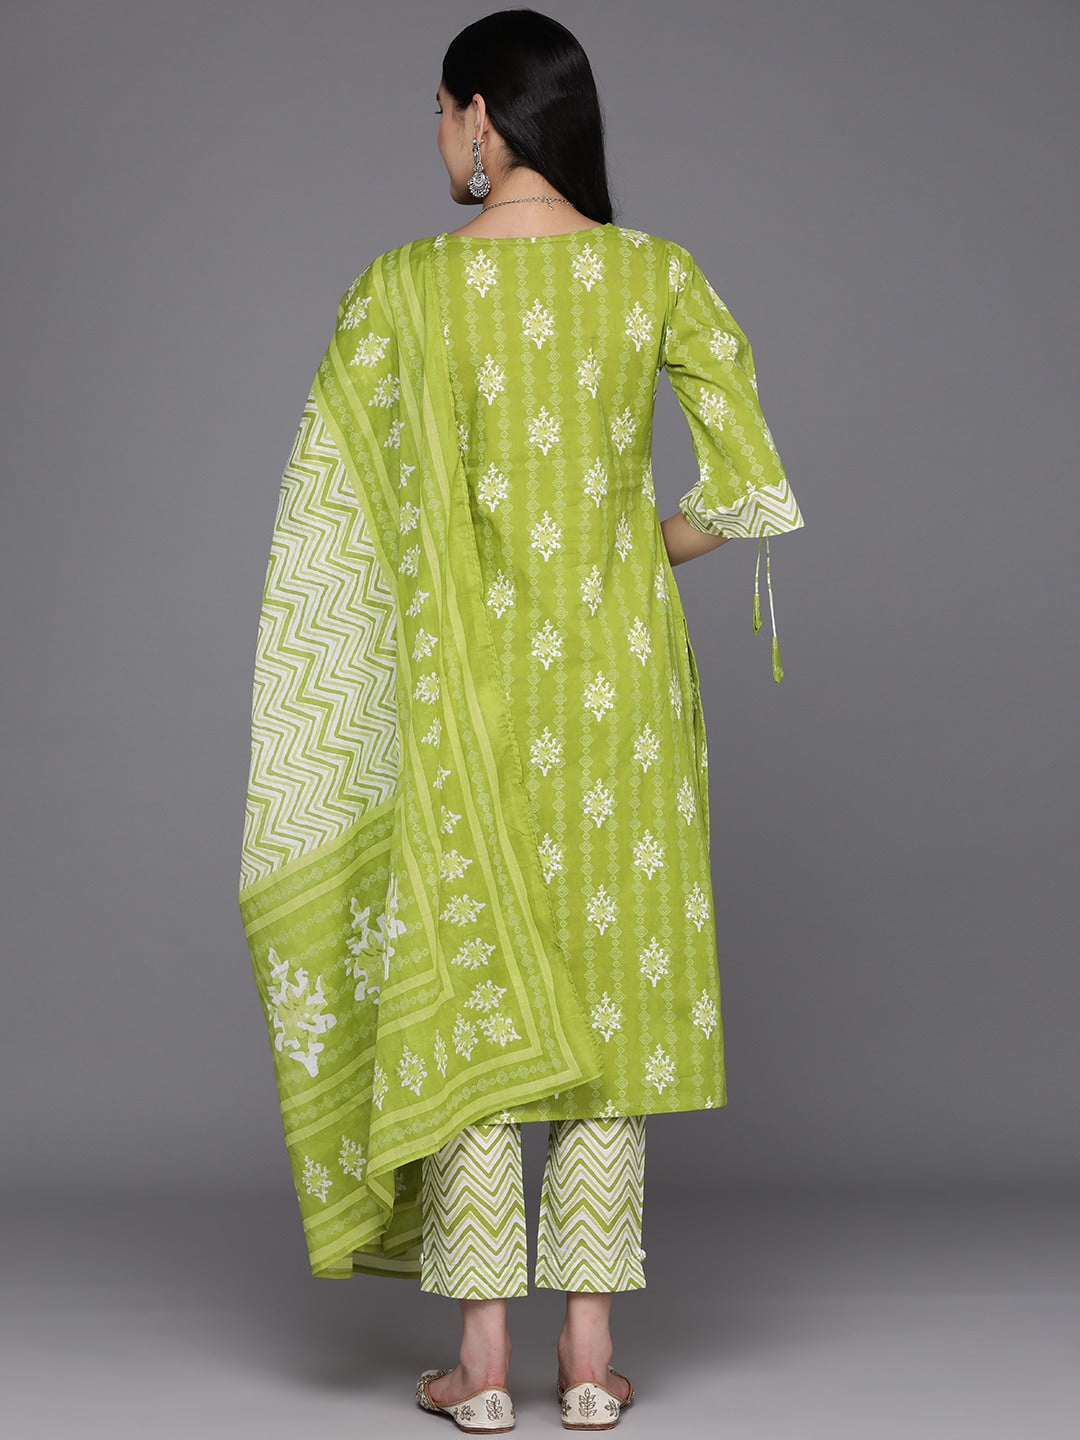 Multicolor Modal Printed Tunic with Dhoto Style Pants Co-Ords - 131-MTKT1853